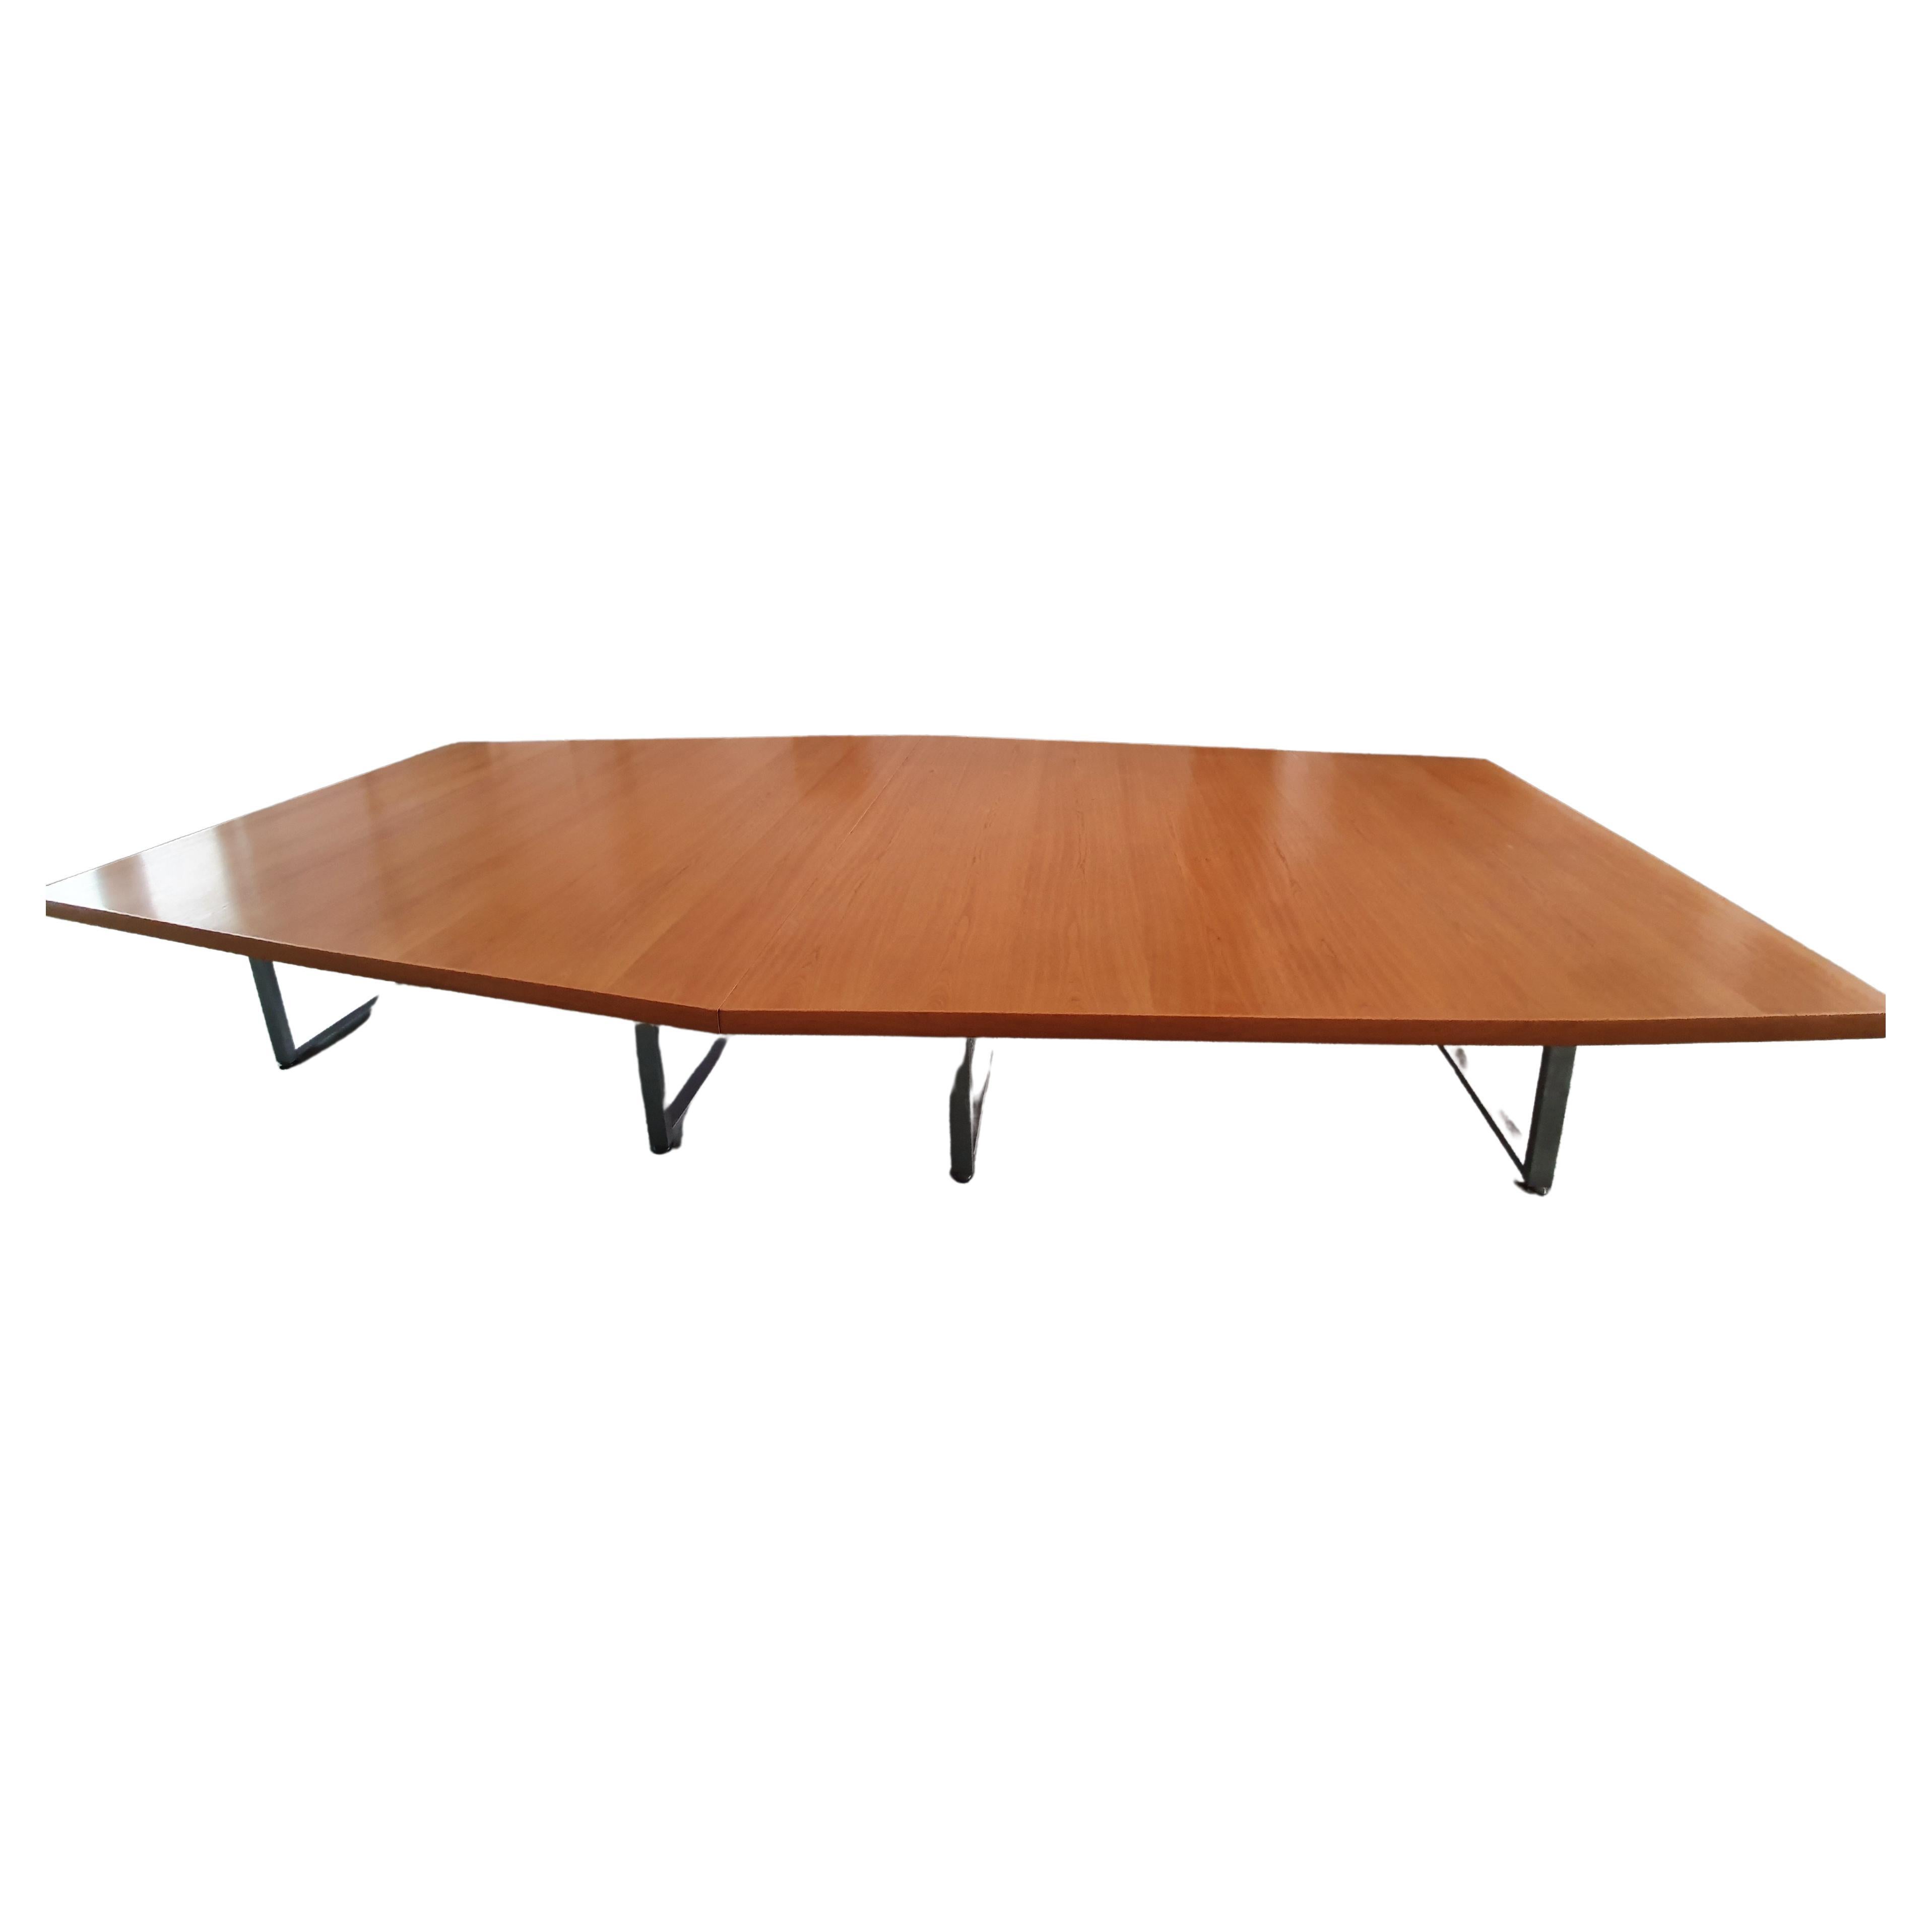 Mid-Century Modern Large Conference Table by Froscher, 1970s Germany